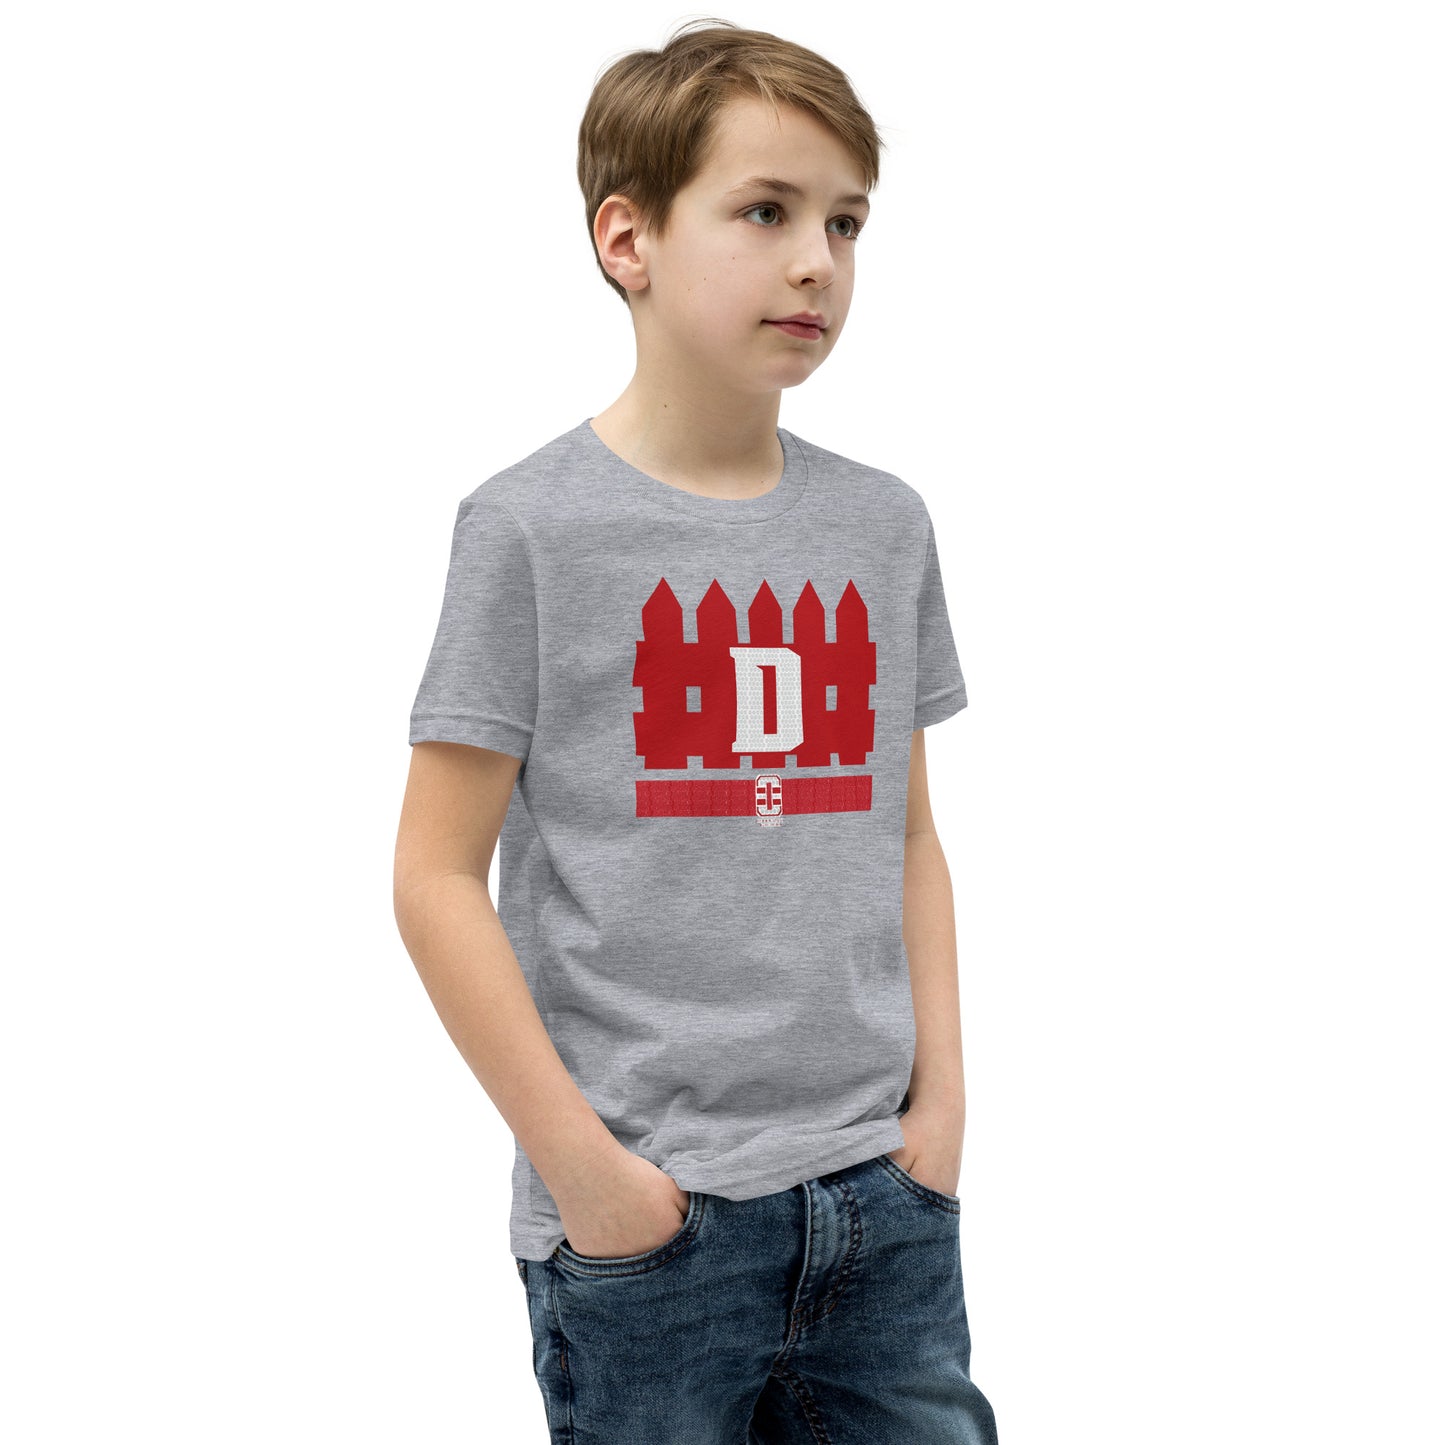 D Fence Youth Short Sleeve T-Shirt